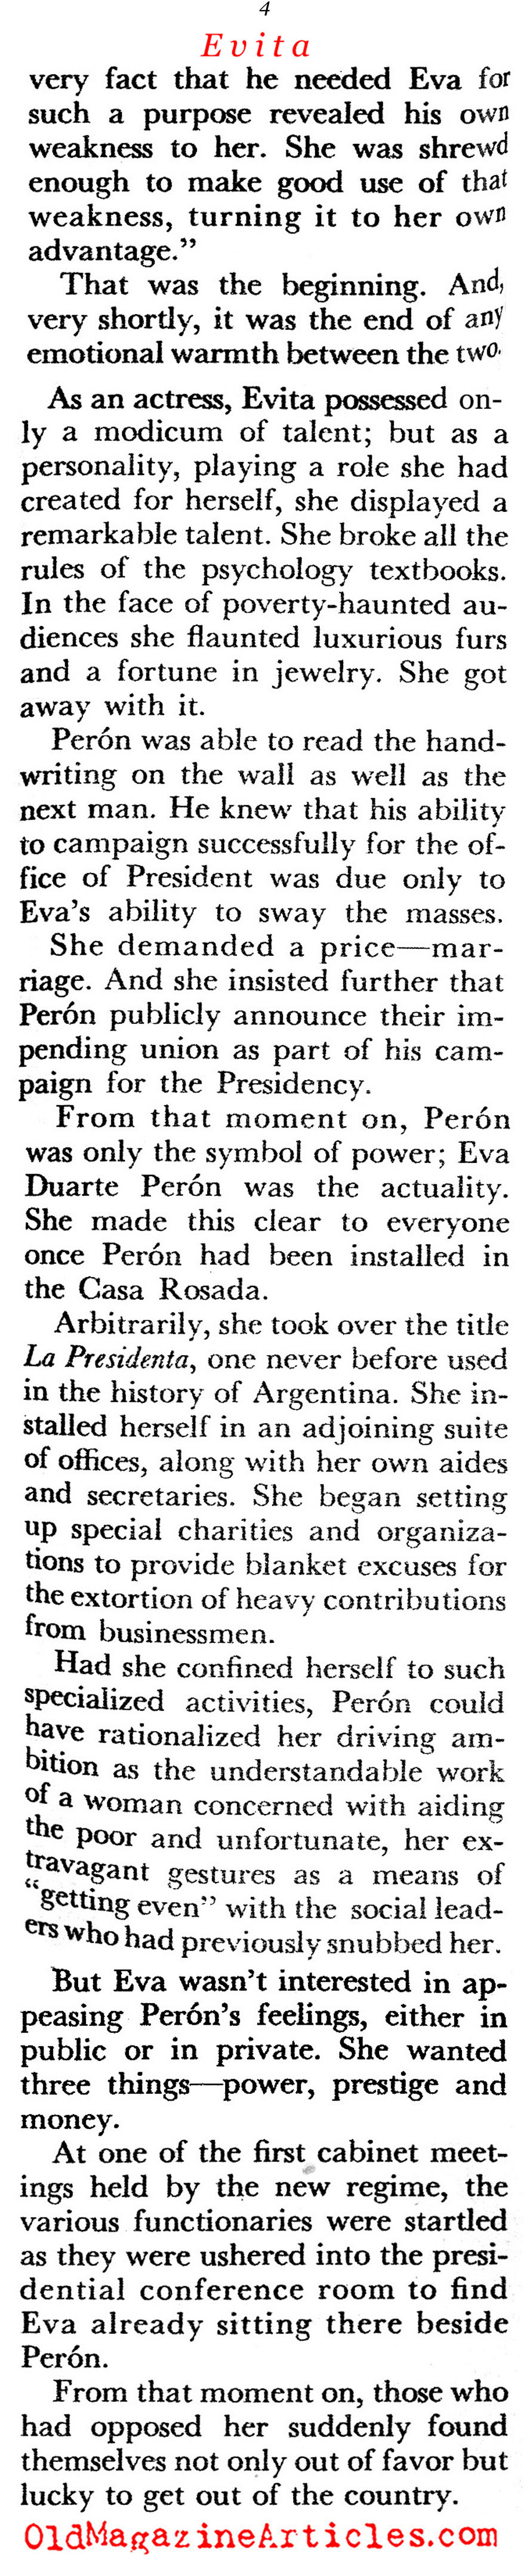 ''The Dictator and his Woman''  (Coronet Magazine, 1956)